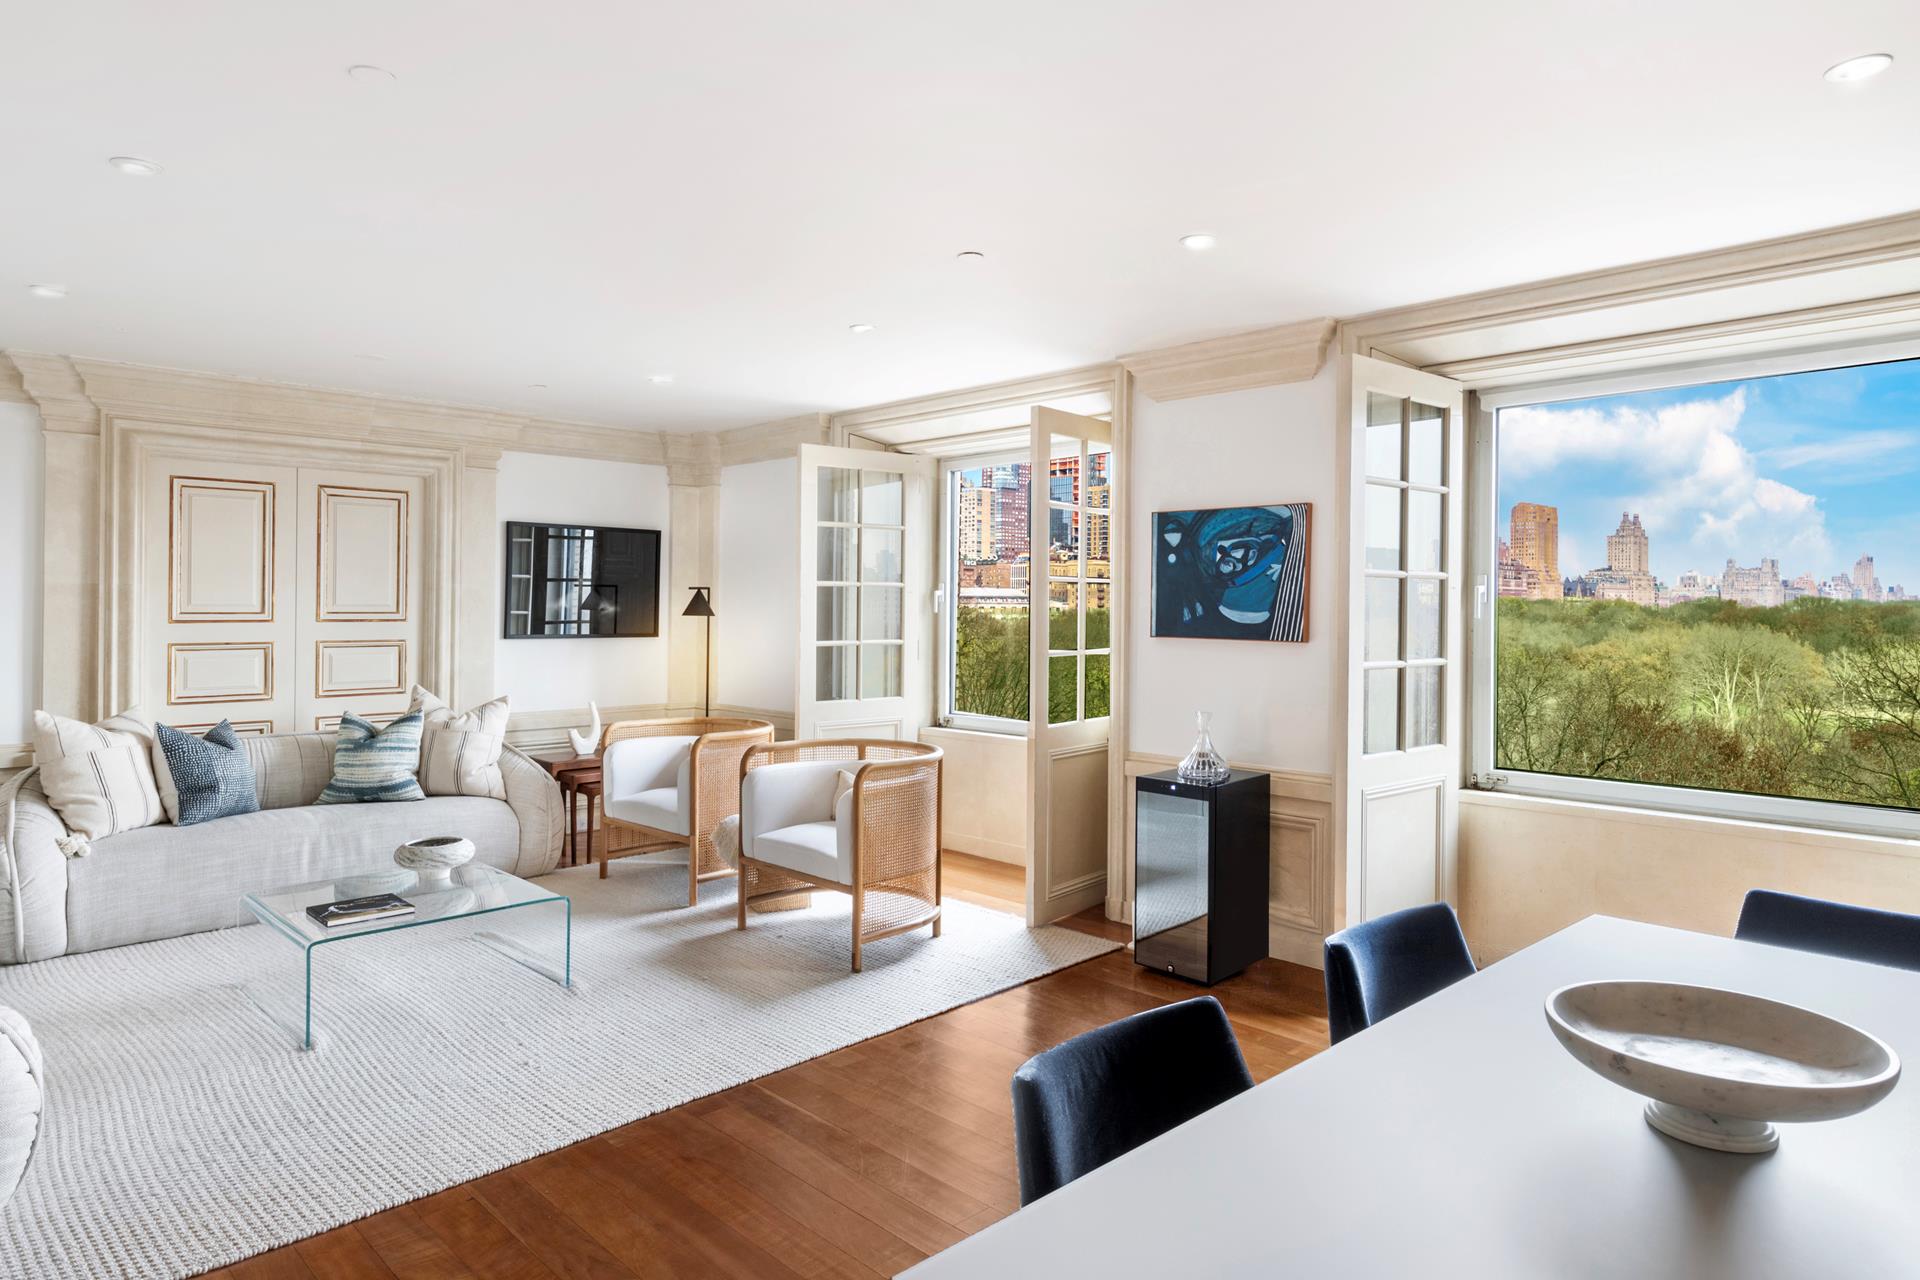 160 Central Park 915, Central Park South, Midtown West, NYC - 3 Bedrooms  
2.5 Bathrooms  
7 Rooms - 